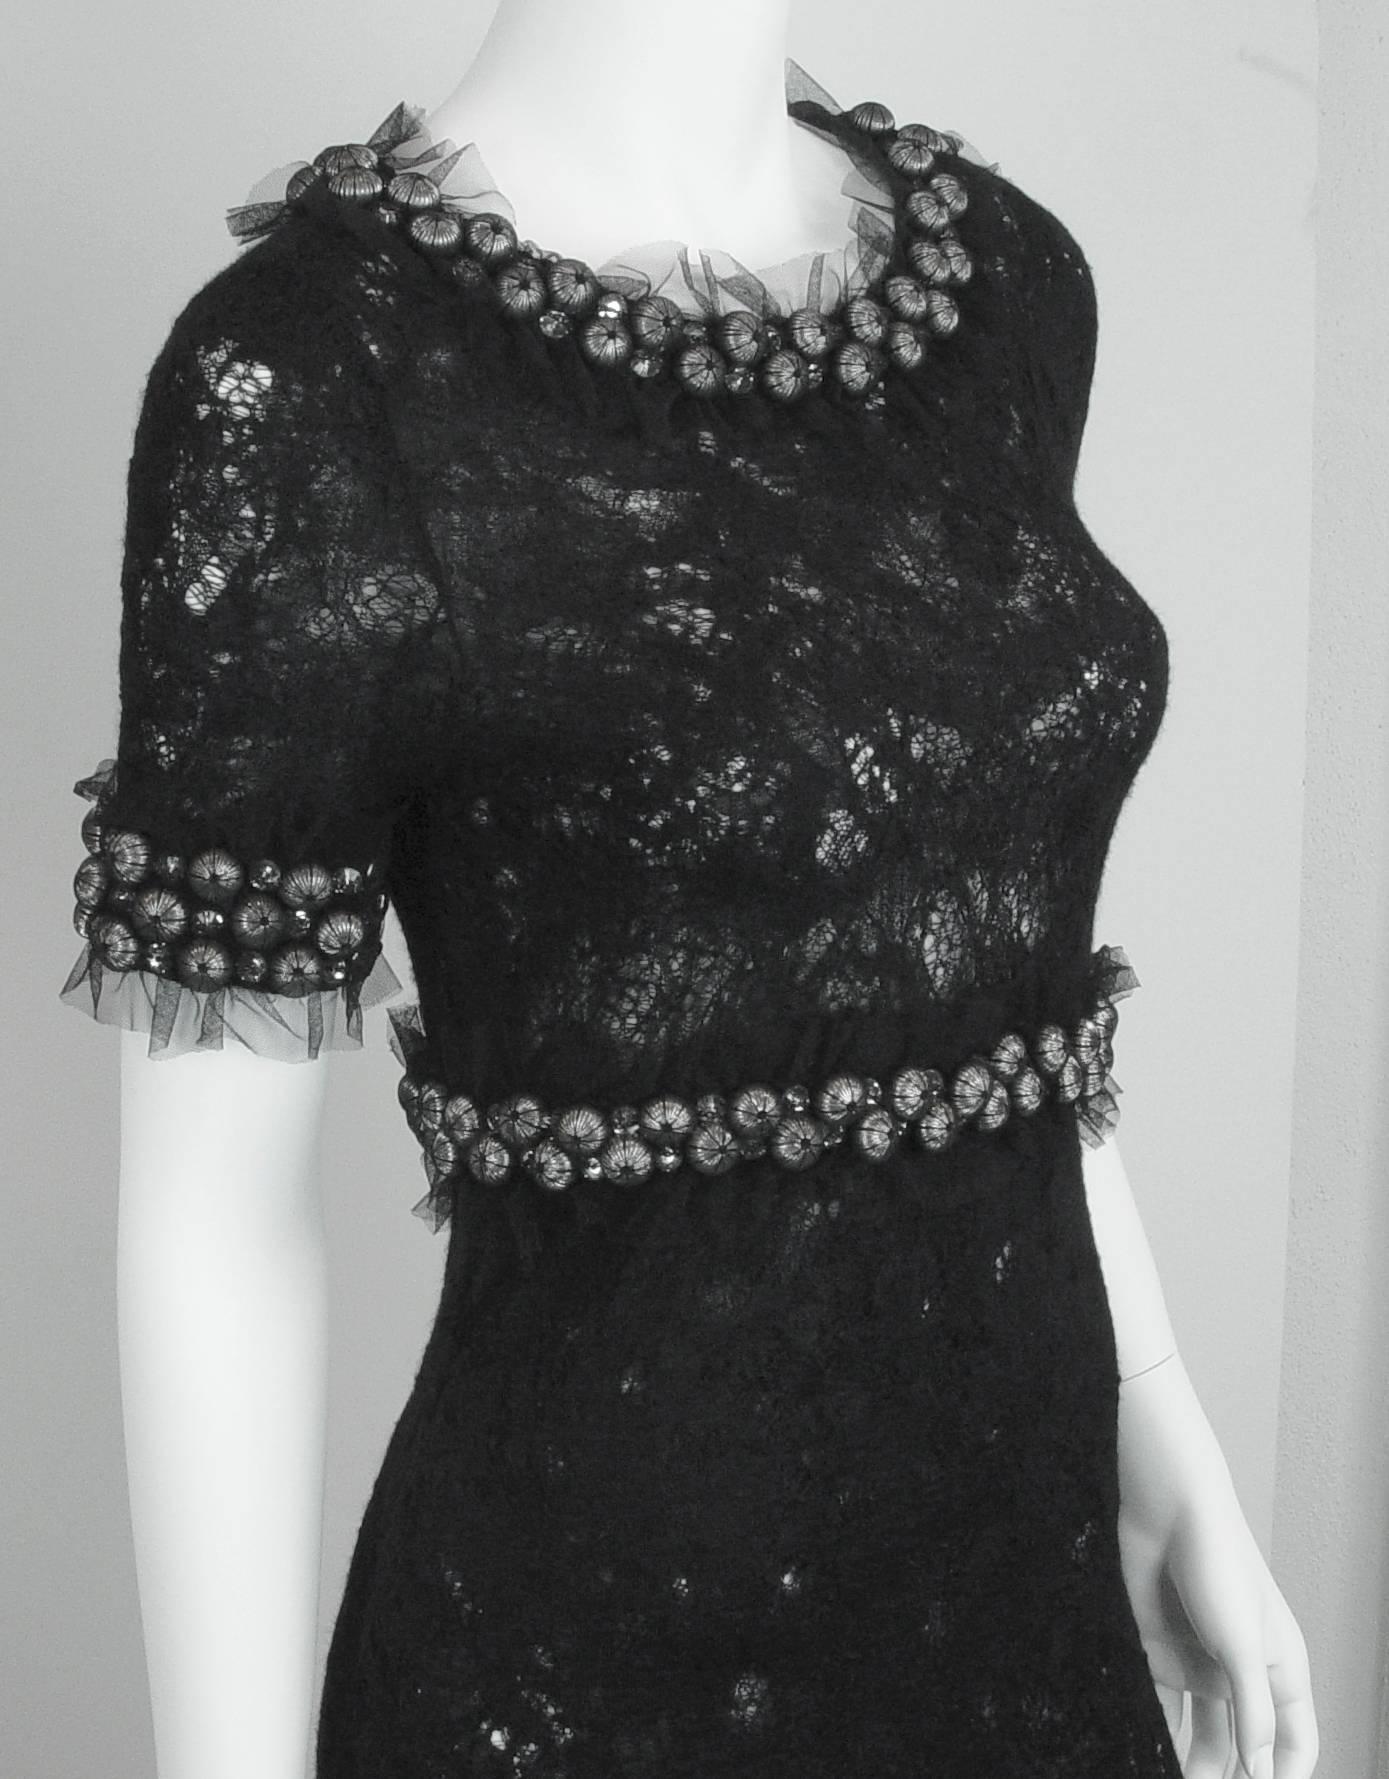 Elegant Chanel evening gown of three dimension black stretchy see-through lace.  Hand made Lesage details include 3/8" Rhinestones and 5/8" silver beads encased in silk net and net ruffles at the neck, waist and bottom of sleeves. This